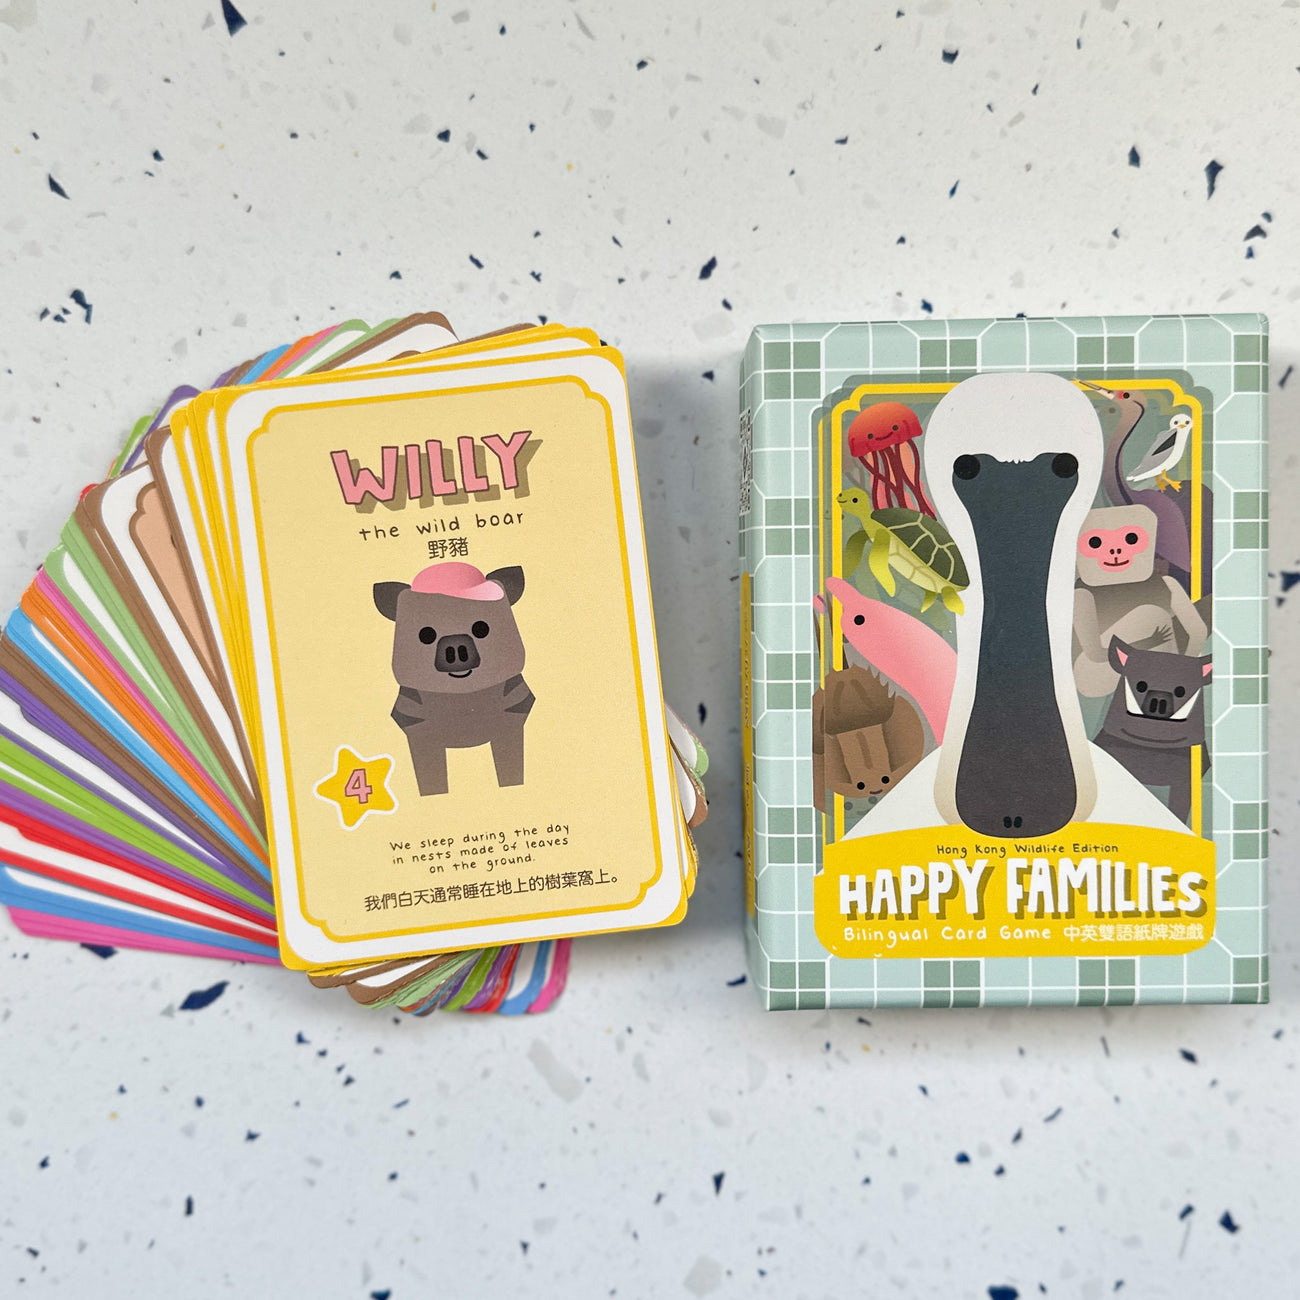 Get ready for some family fun with the Happy Families card game! This classic game is perfect for all ages and is sure to bring laughter and joy to any gathering. Buy now from Bookazine HK and start creating happy memories with your loved ones.